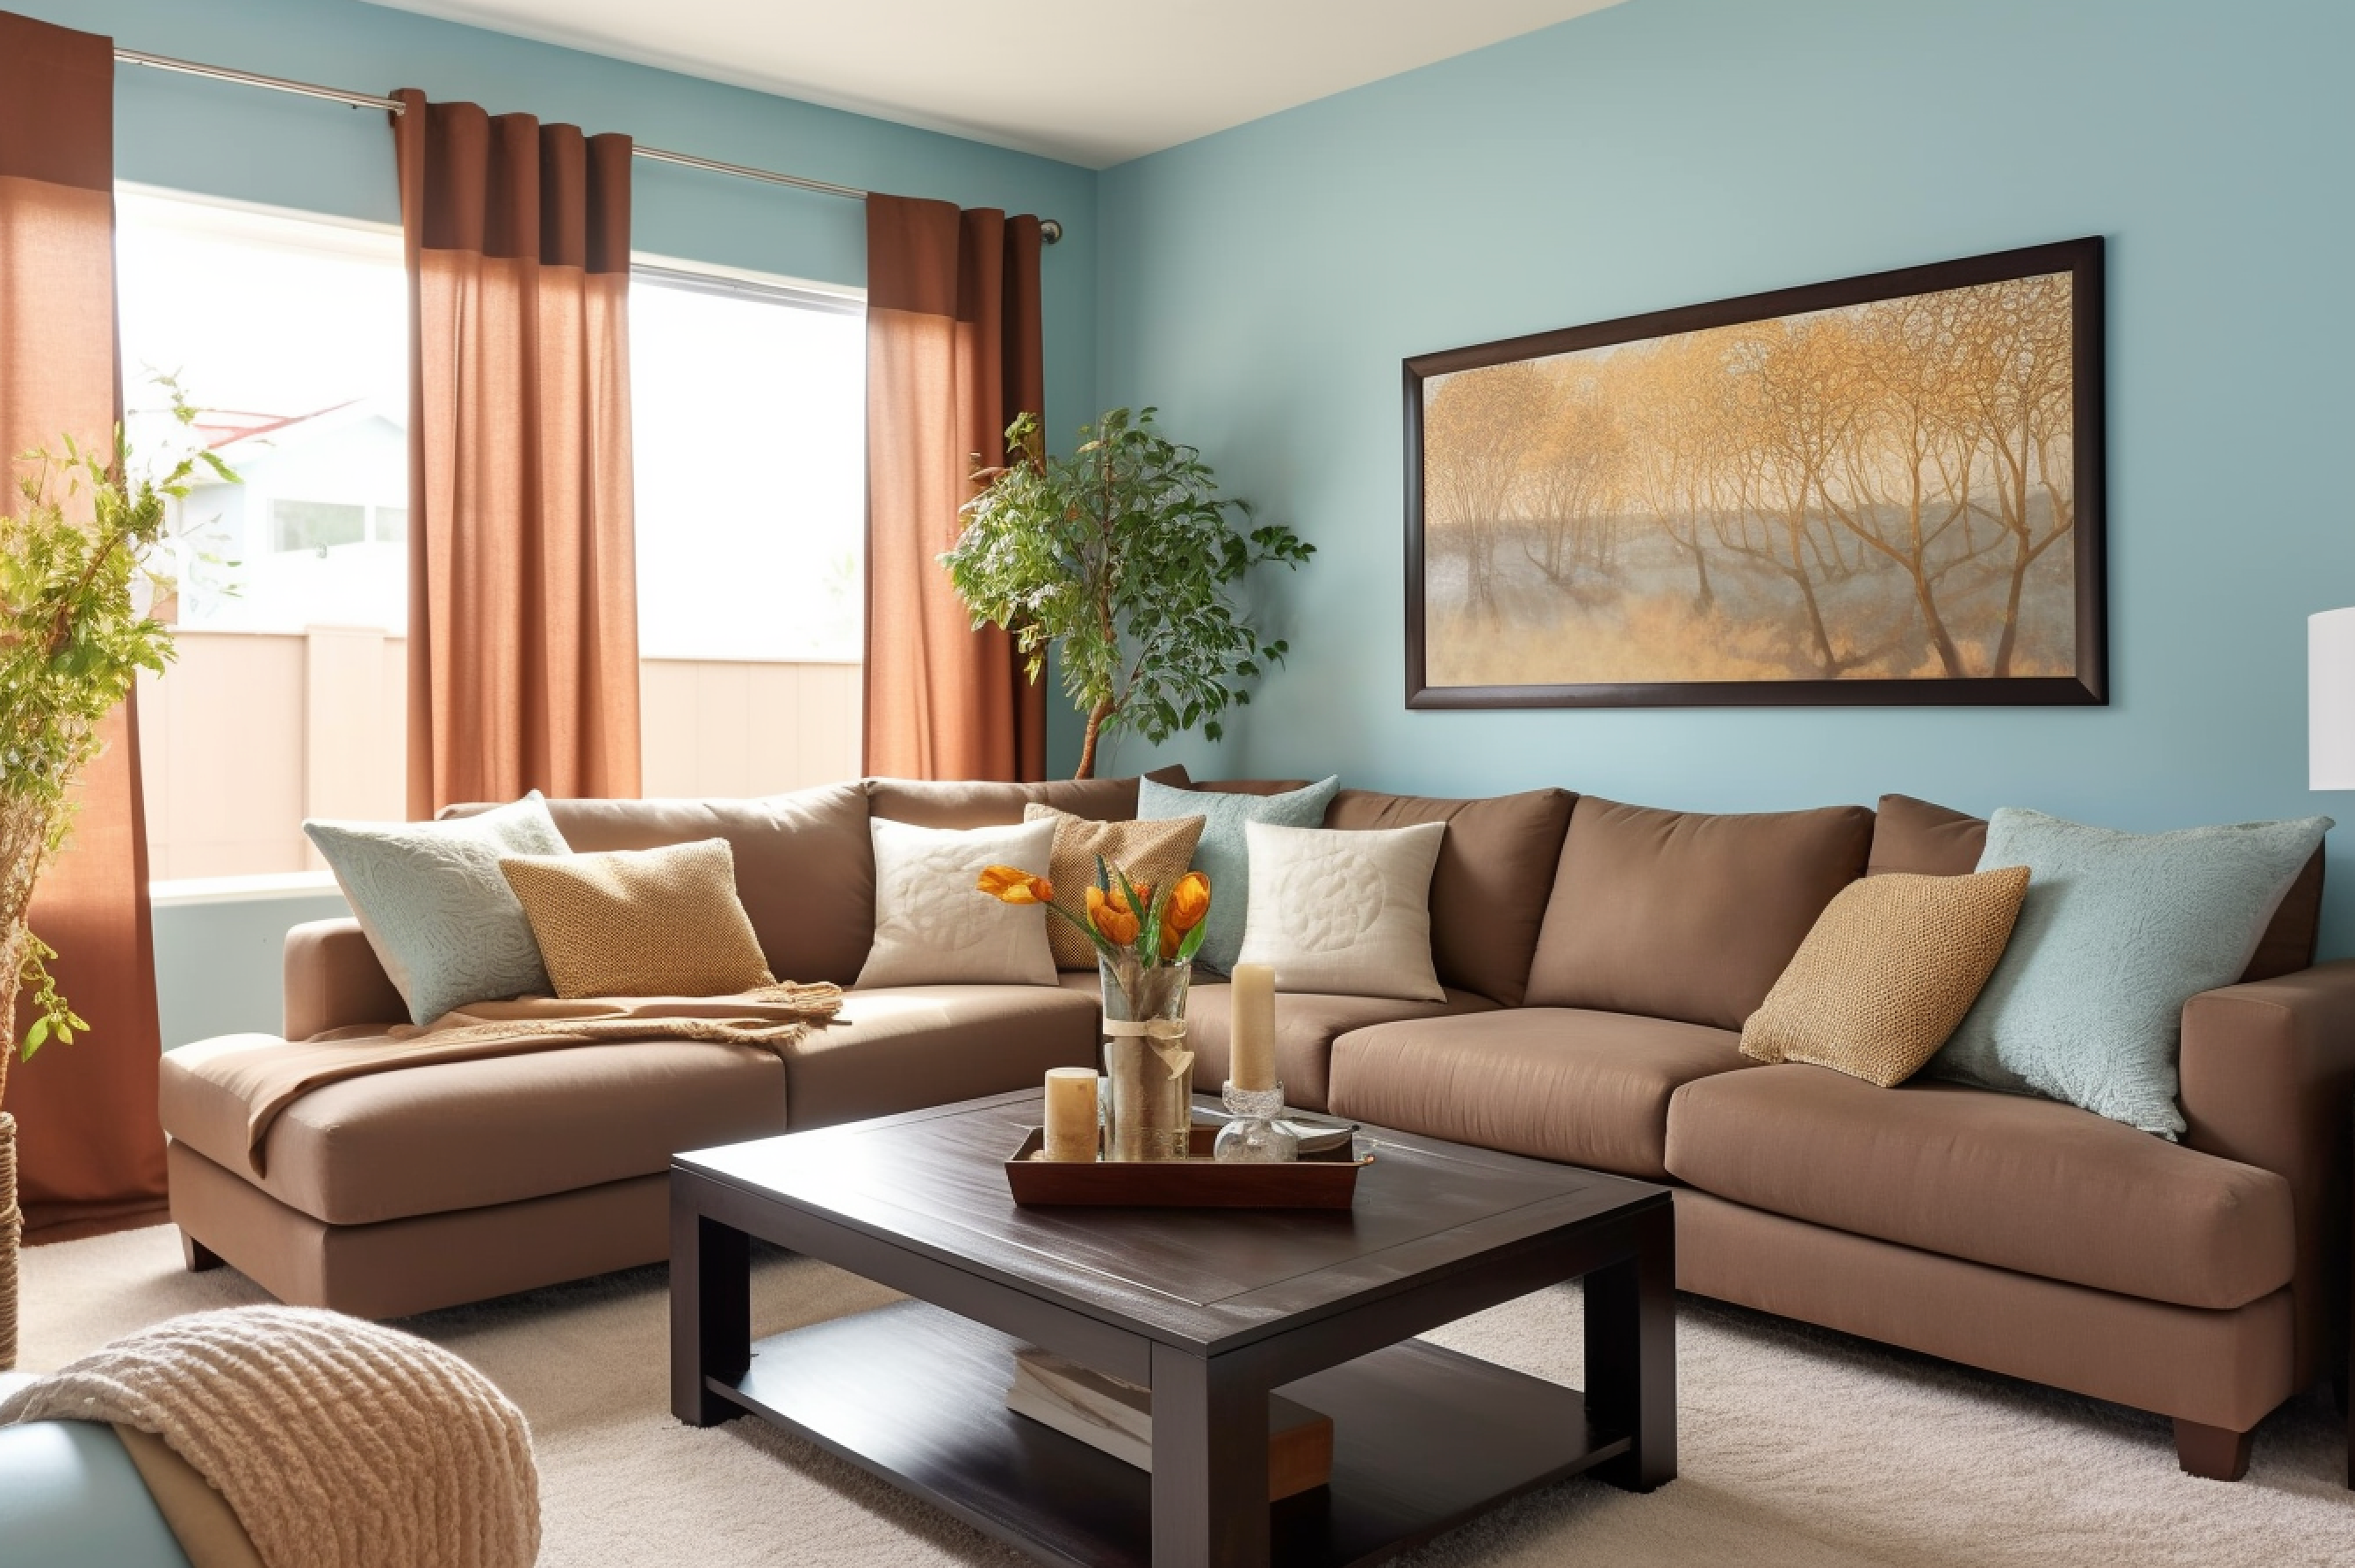 Picture of a living room with a mocha brown sectional sofa set against sky blue painted walls, adorned with brown and blue accessories.